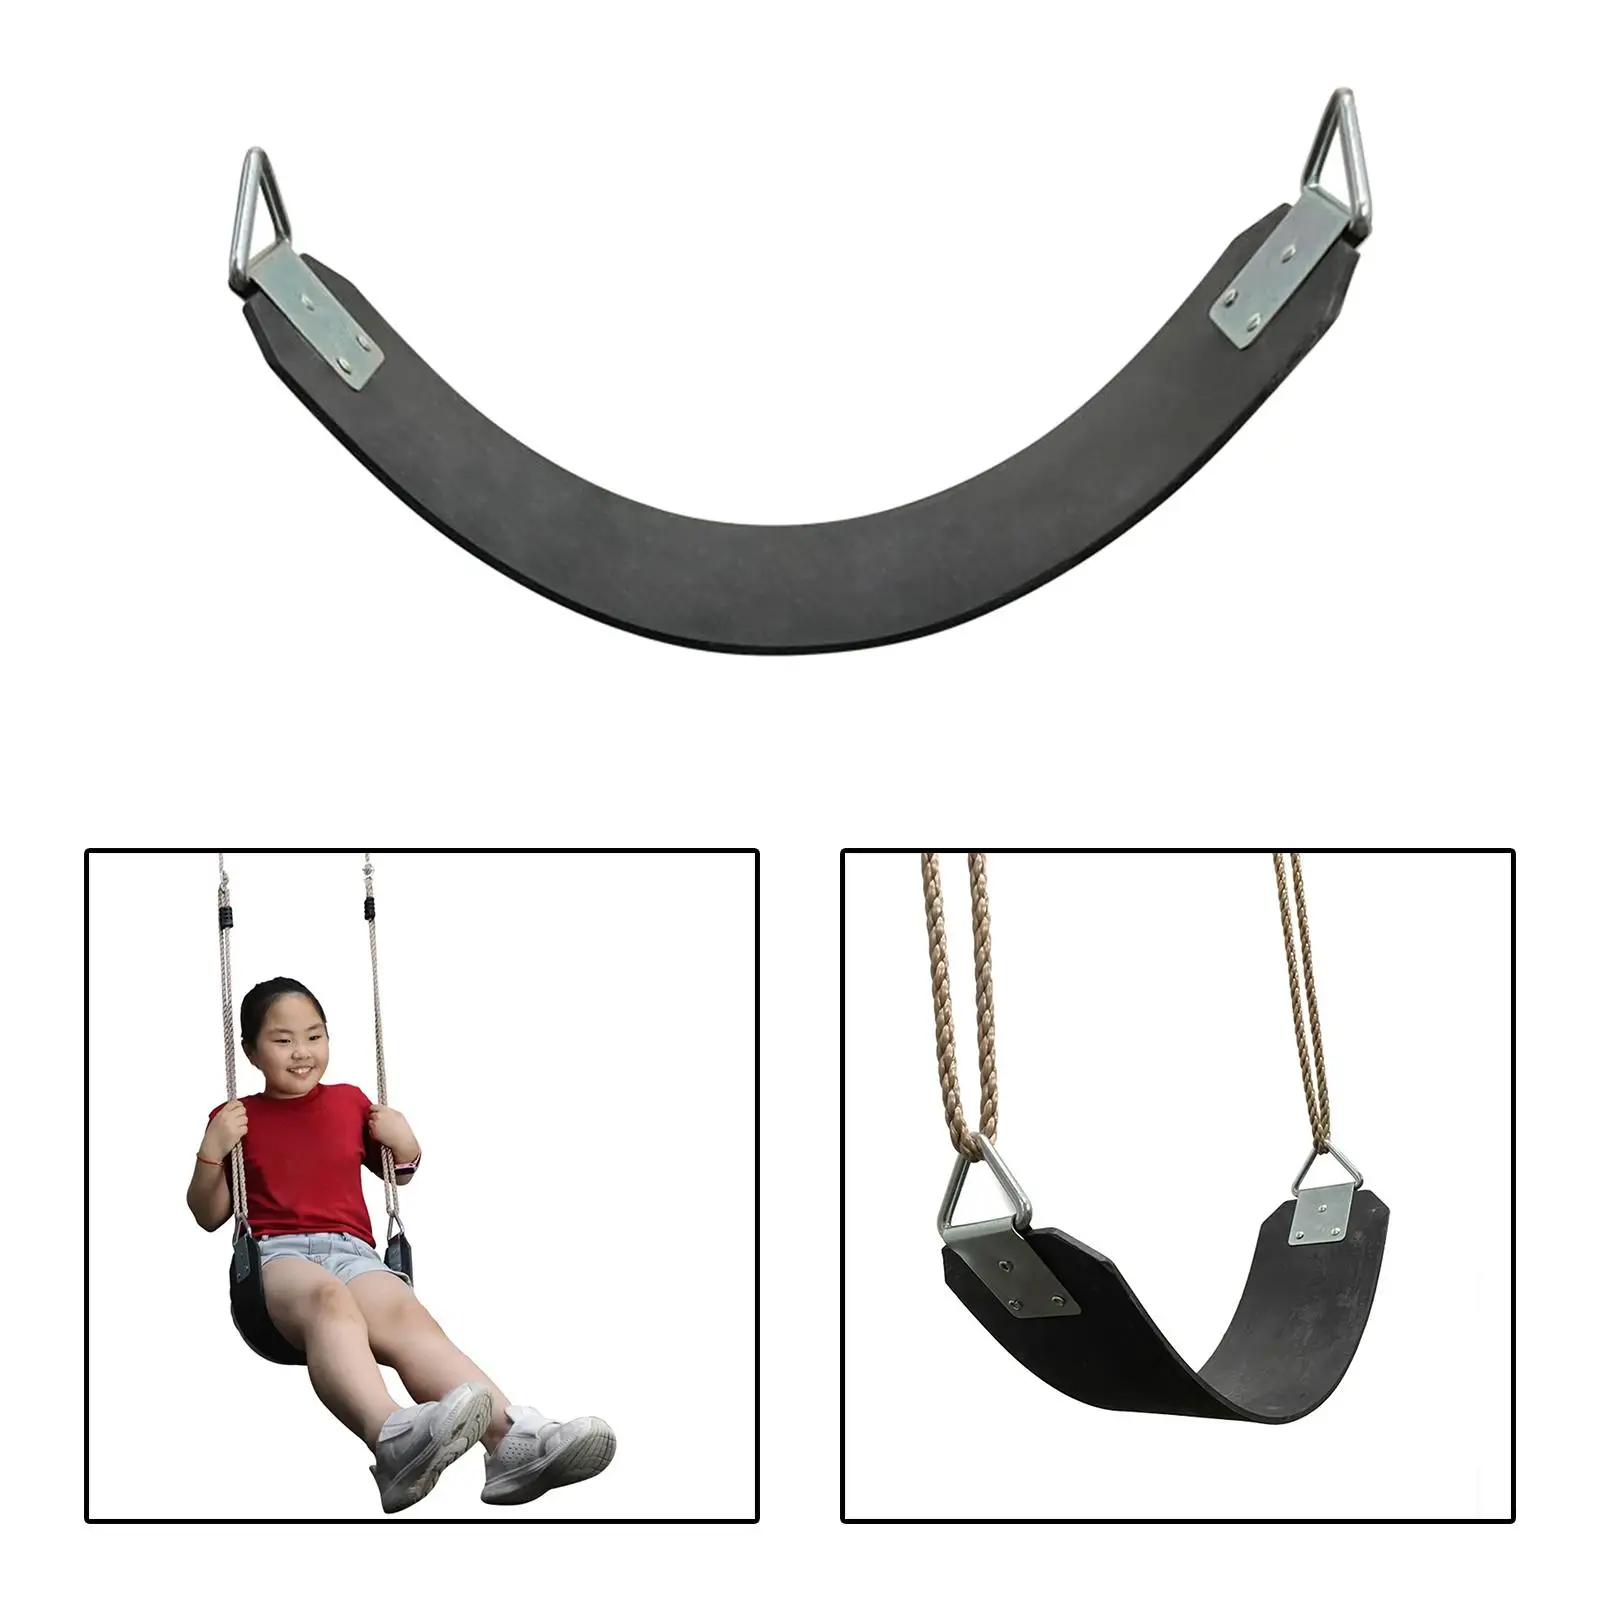 Rubber Swing Seat Garden Swings with Metal Triangle Rings Kids Toddler Toys Yard Swing for Park Gym Backyard Yard Outdoors